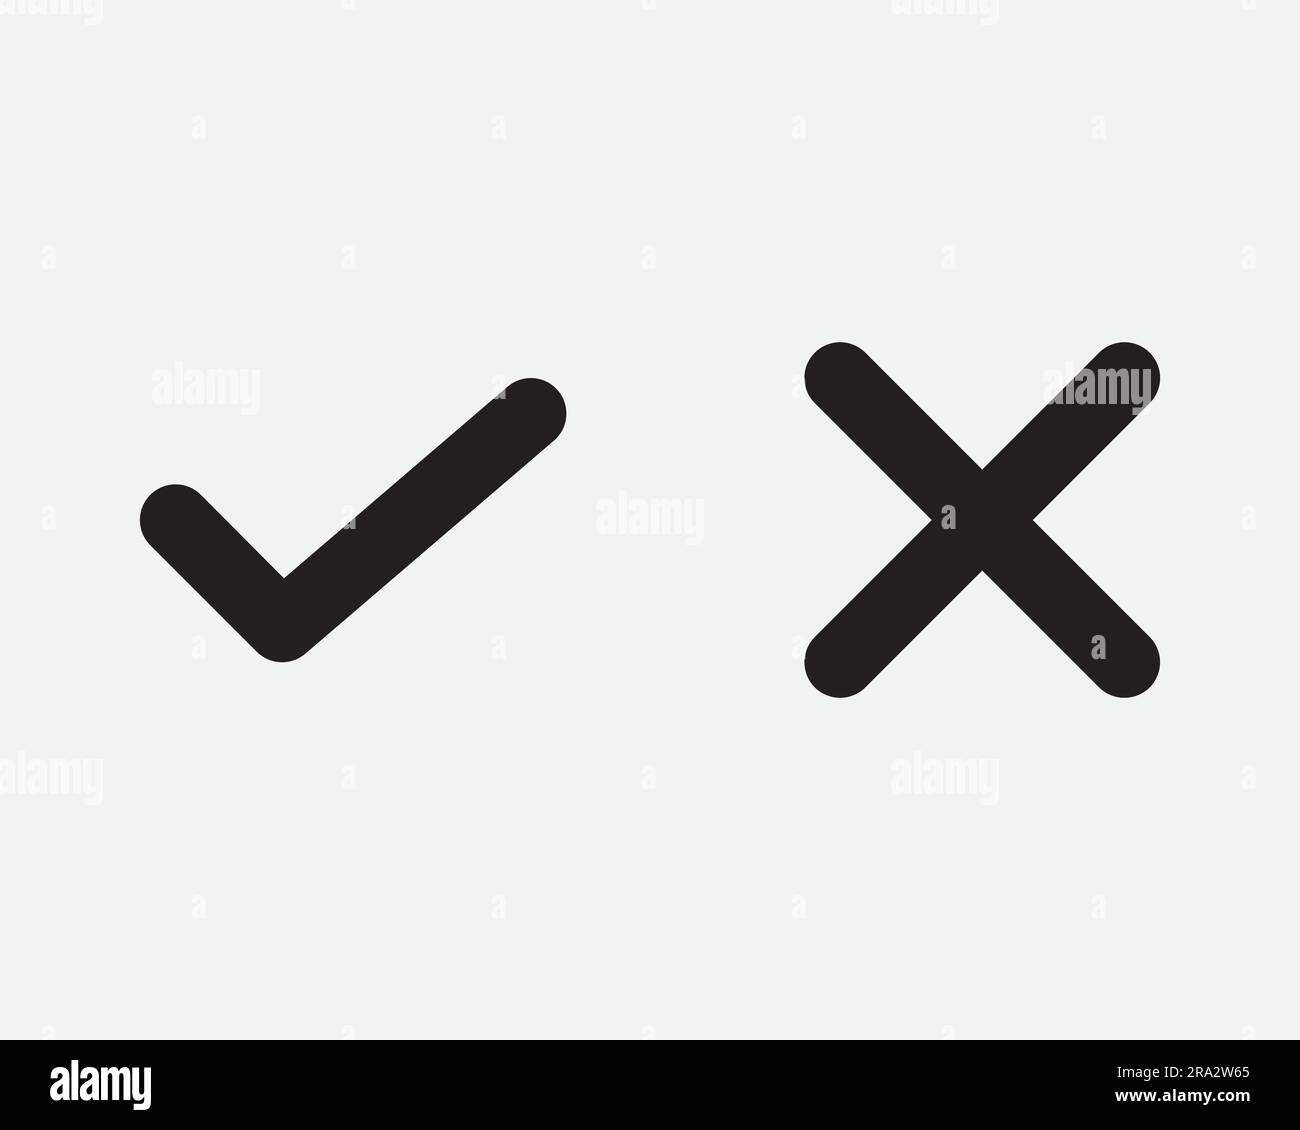 Icona Right and Wrong Sì No Right Wrong positive negative Tick Cross x Vote Choice Approve Black White Graphic Clipart ArtWork Symbol Sign Vector EPS Illustrazione Vettoriale